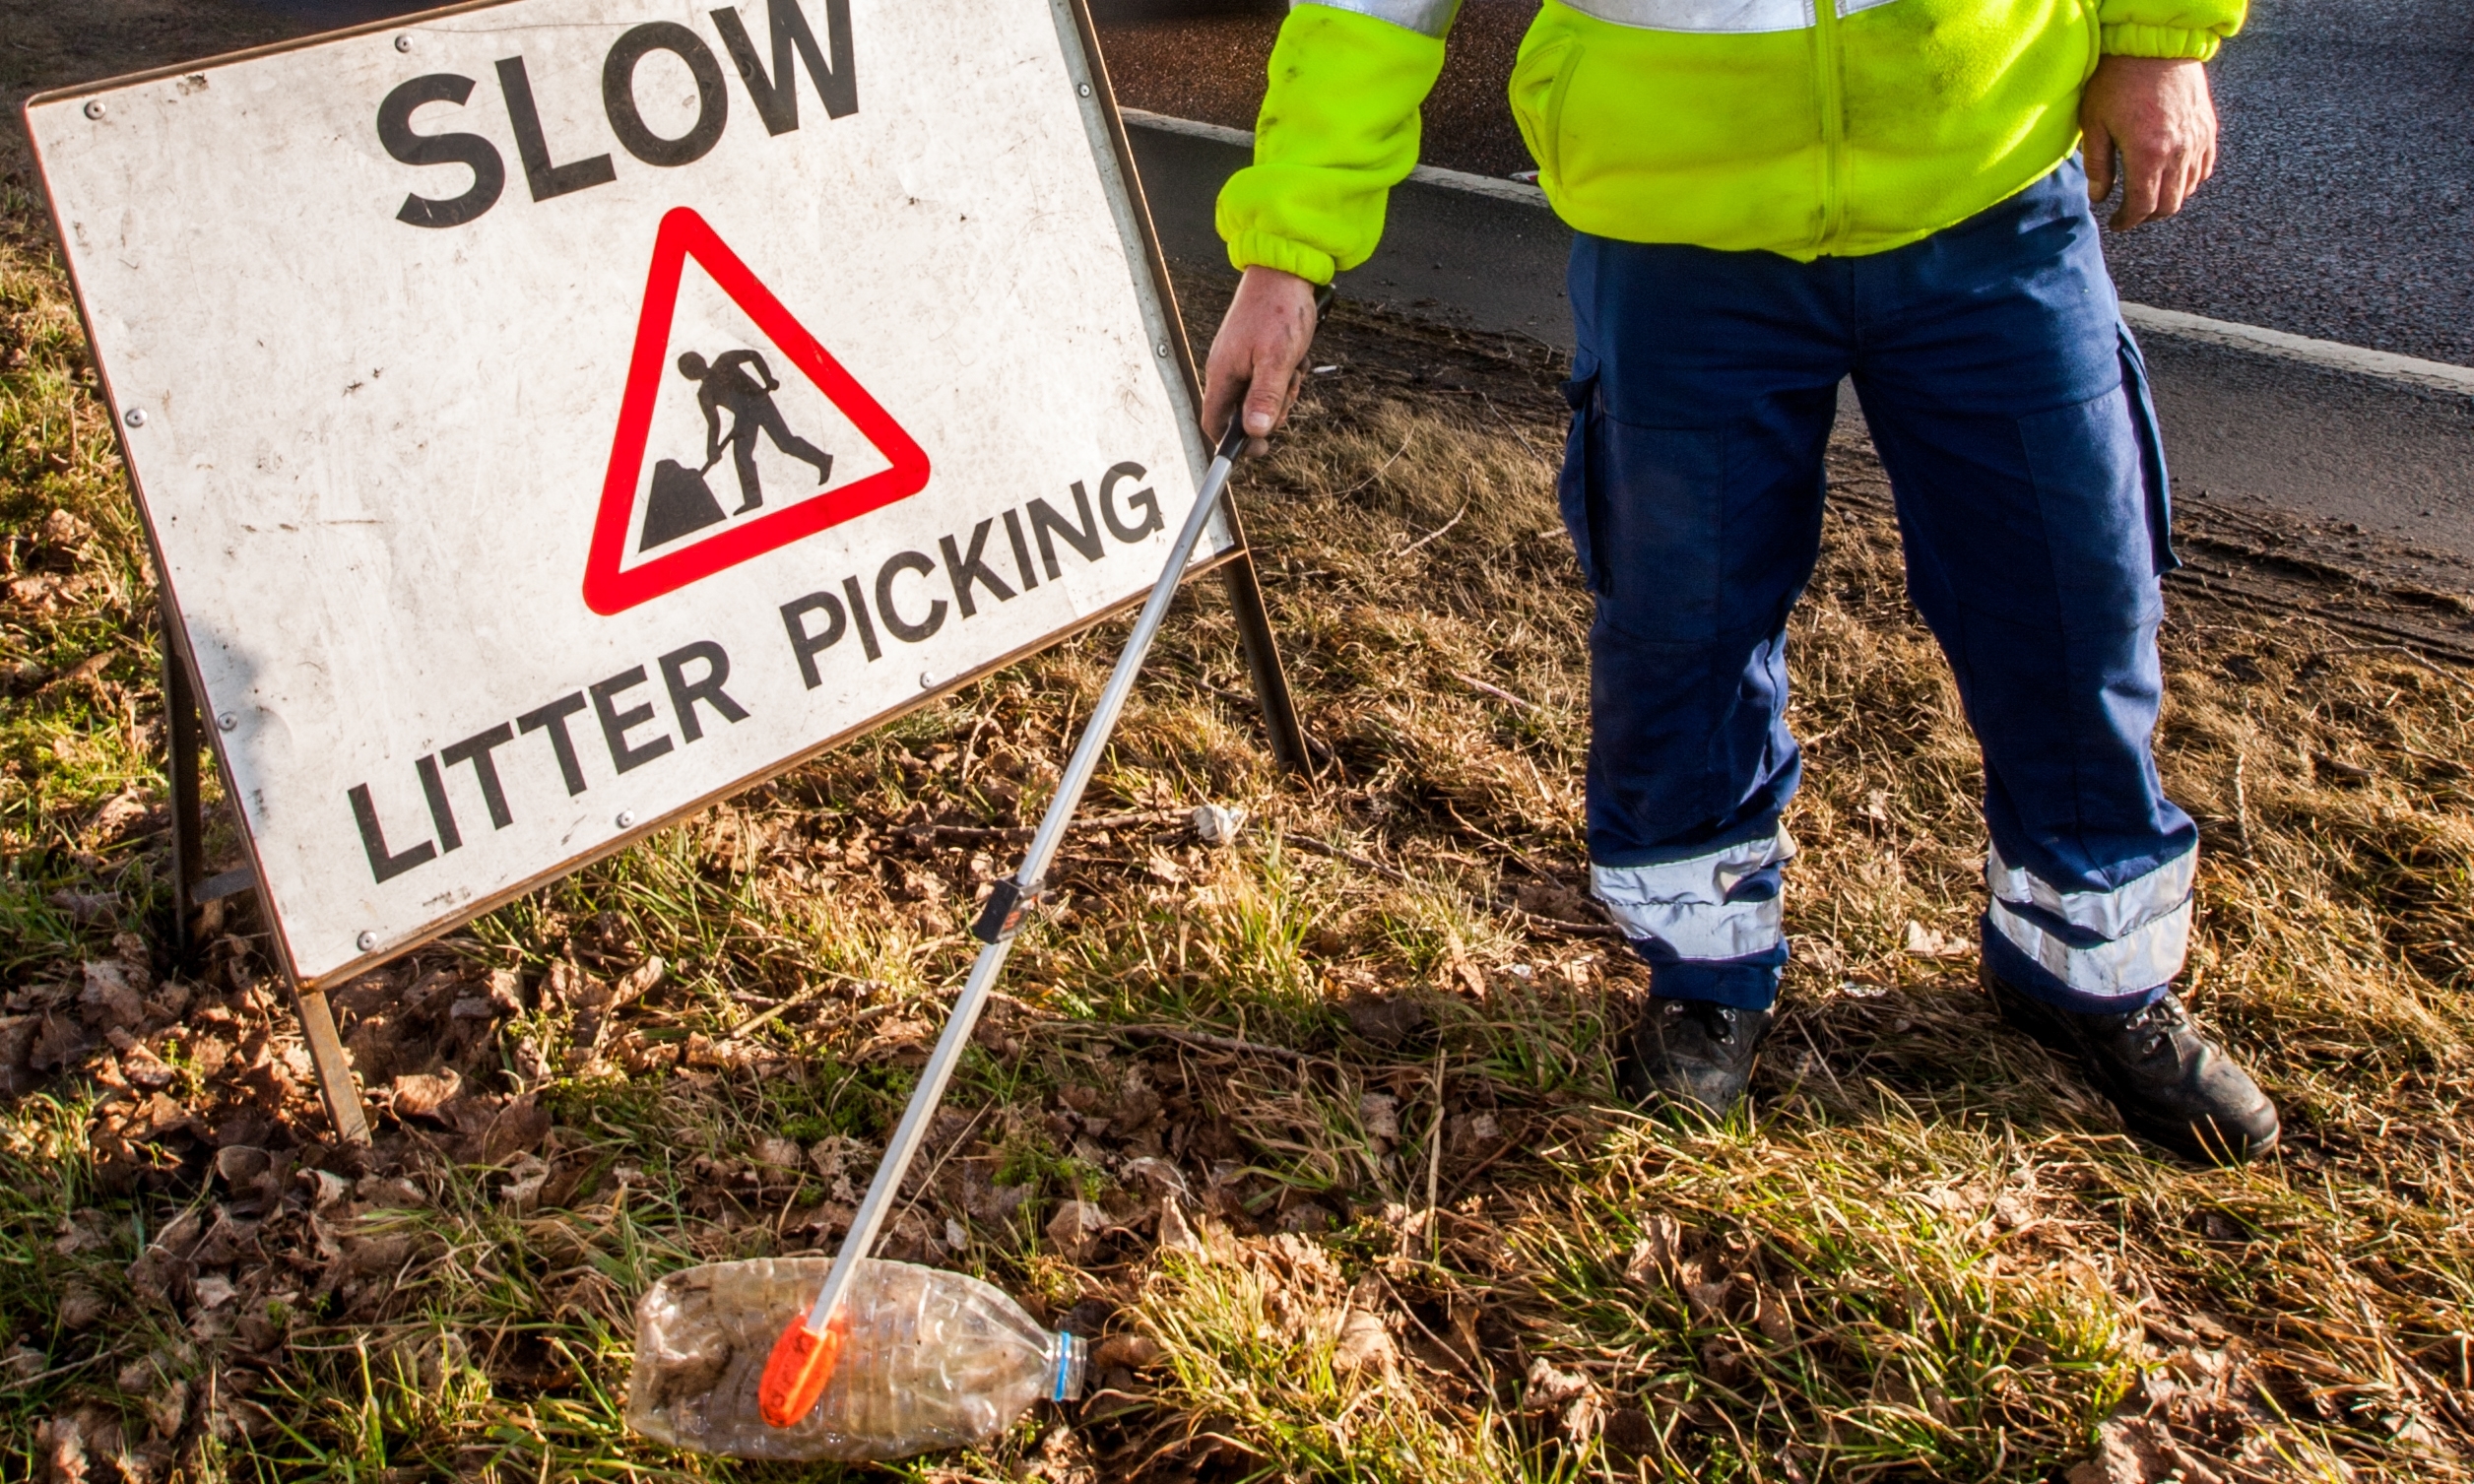 As well as being costly, roadside litter picks can put workers at greater danger.